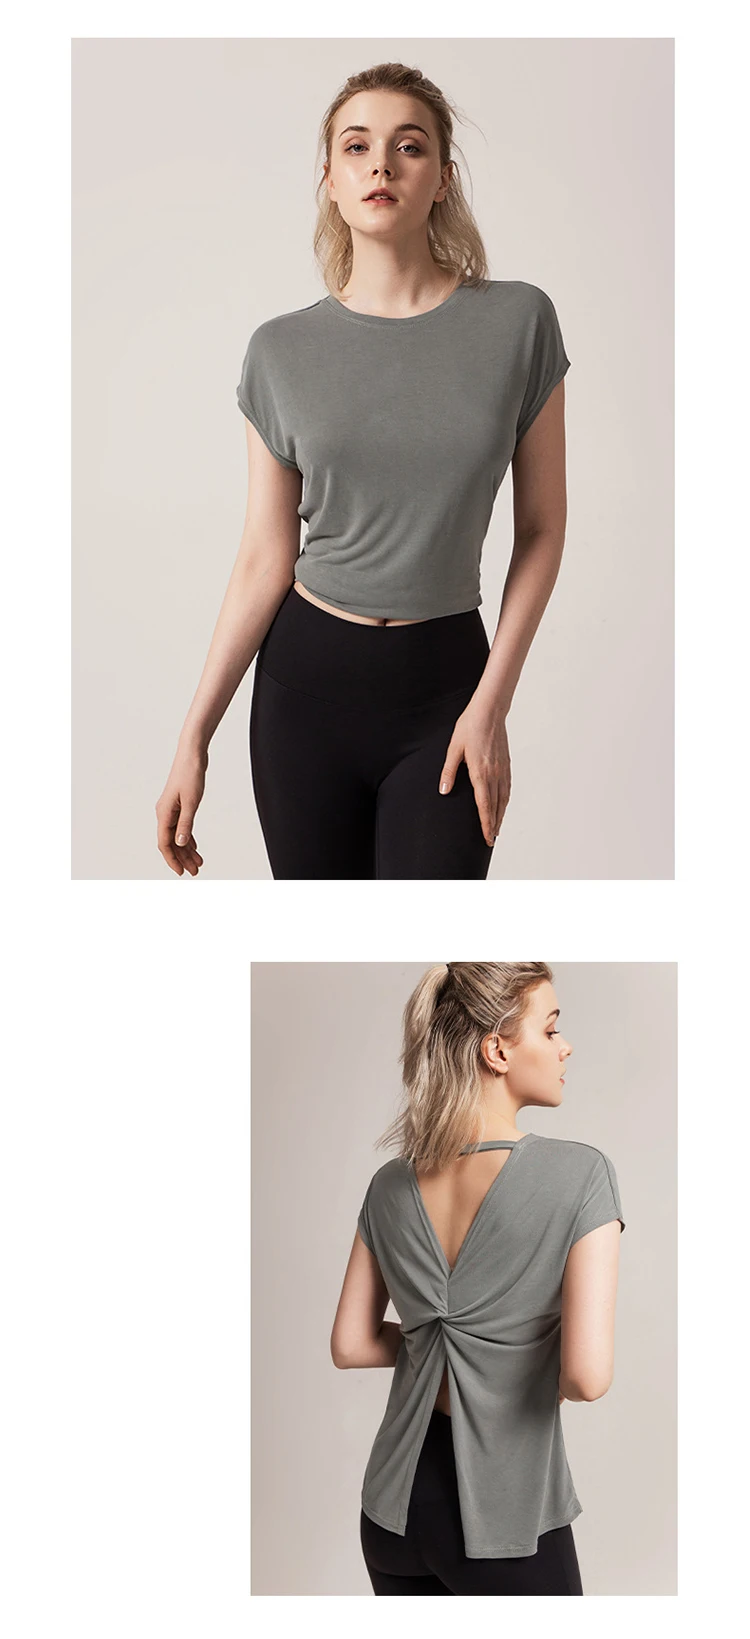 ARRIVE GUIDE Crop Top Athletic Shirts for Women Cute Sleeveless